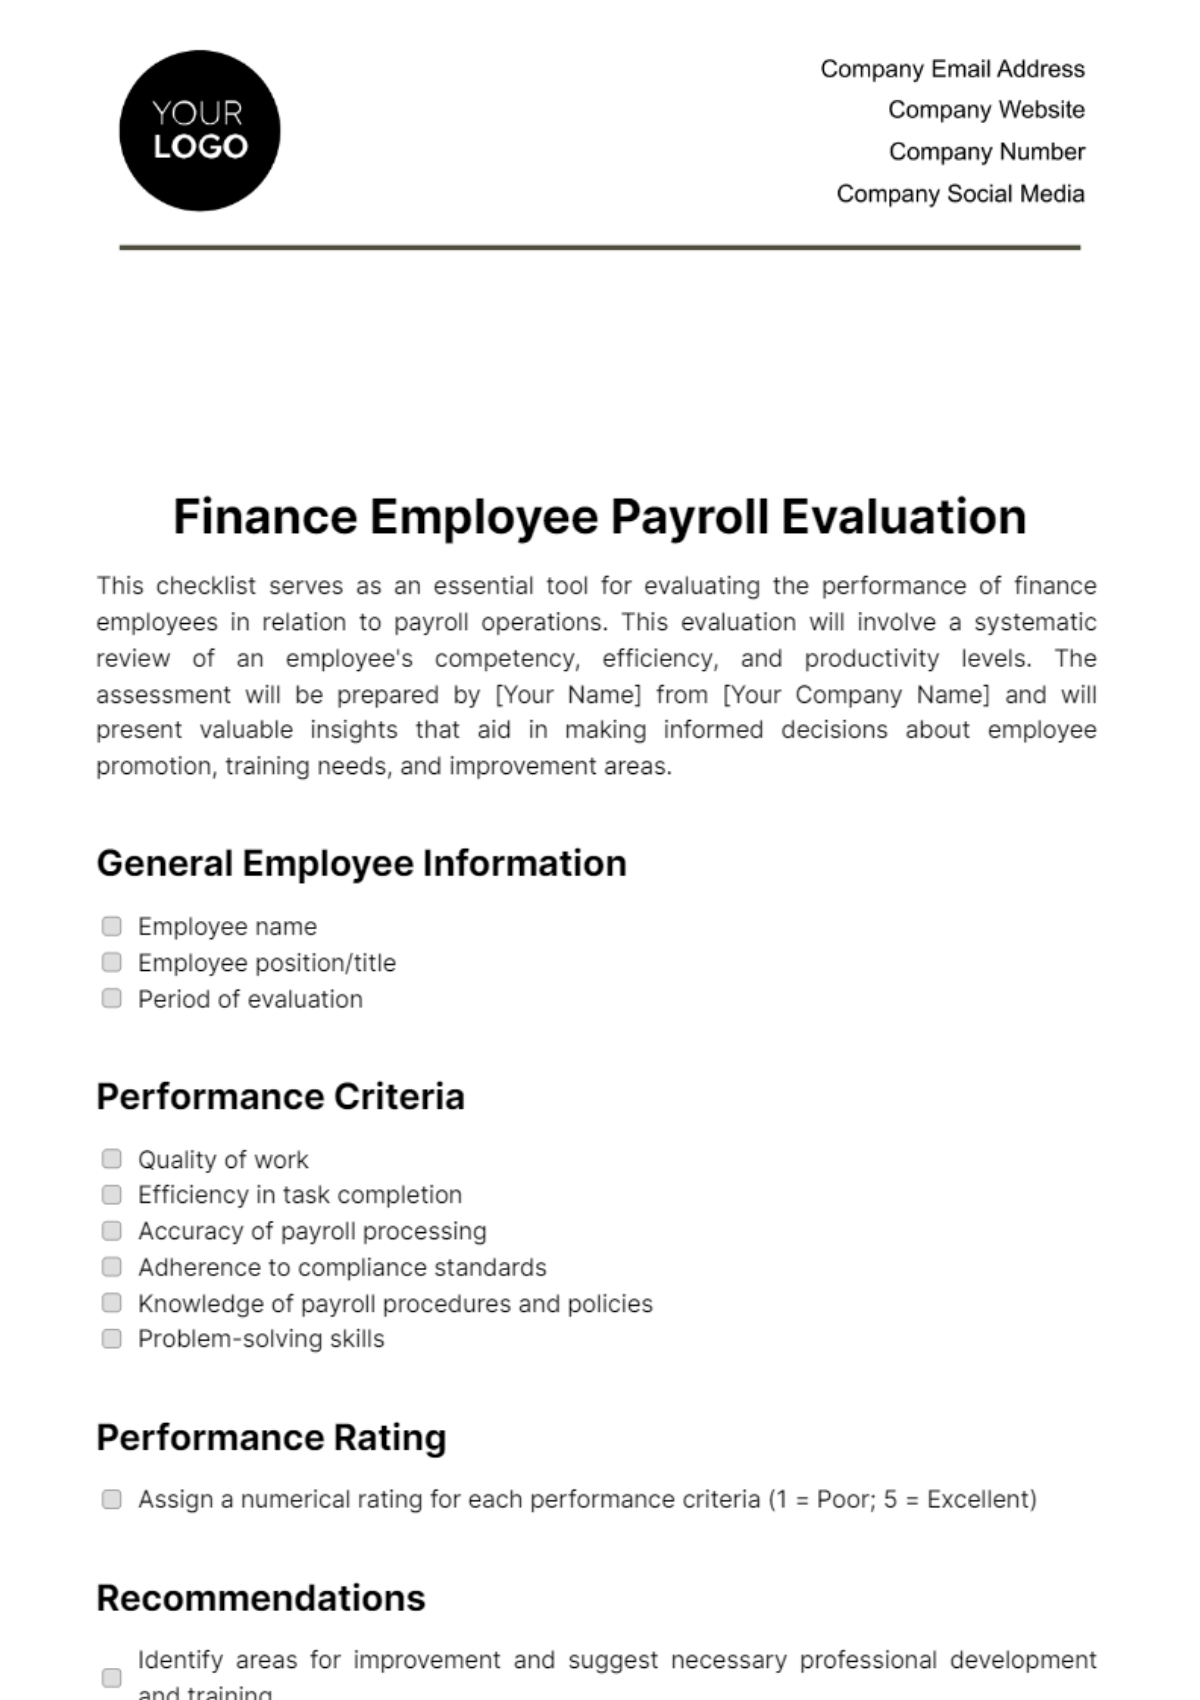 Finance Employee Payroll Evaluation Template